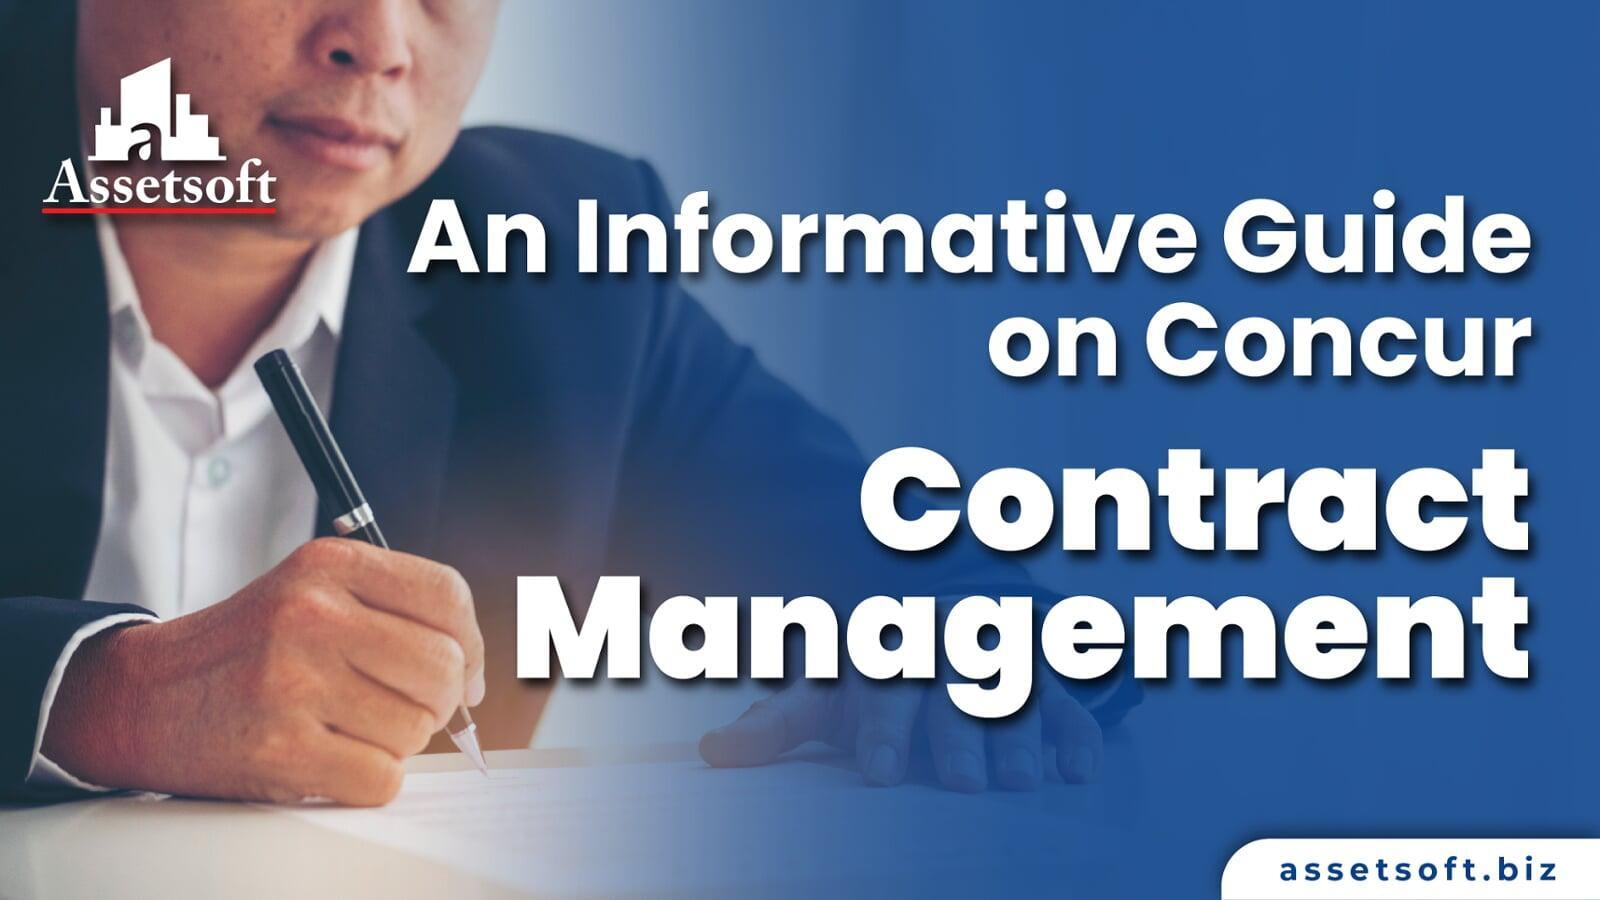 An Informative Guide on Concur Contract Management 